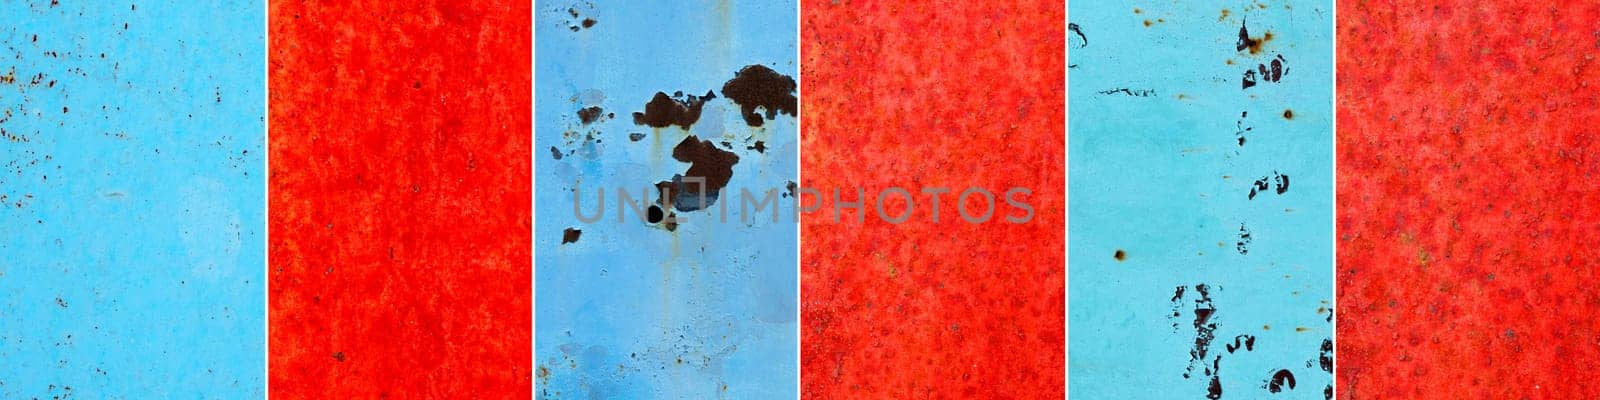 Red and blue metal surface with spots creating textured wall background, collage by darksoul72